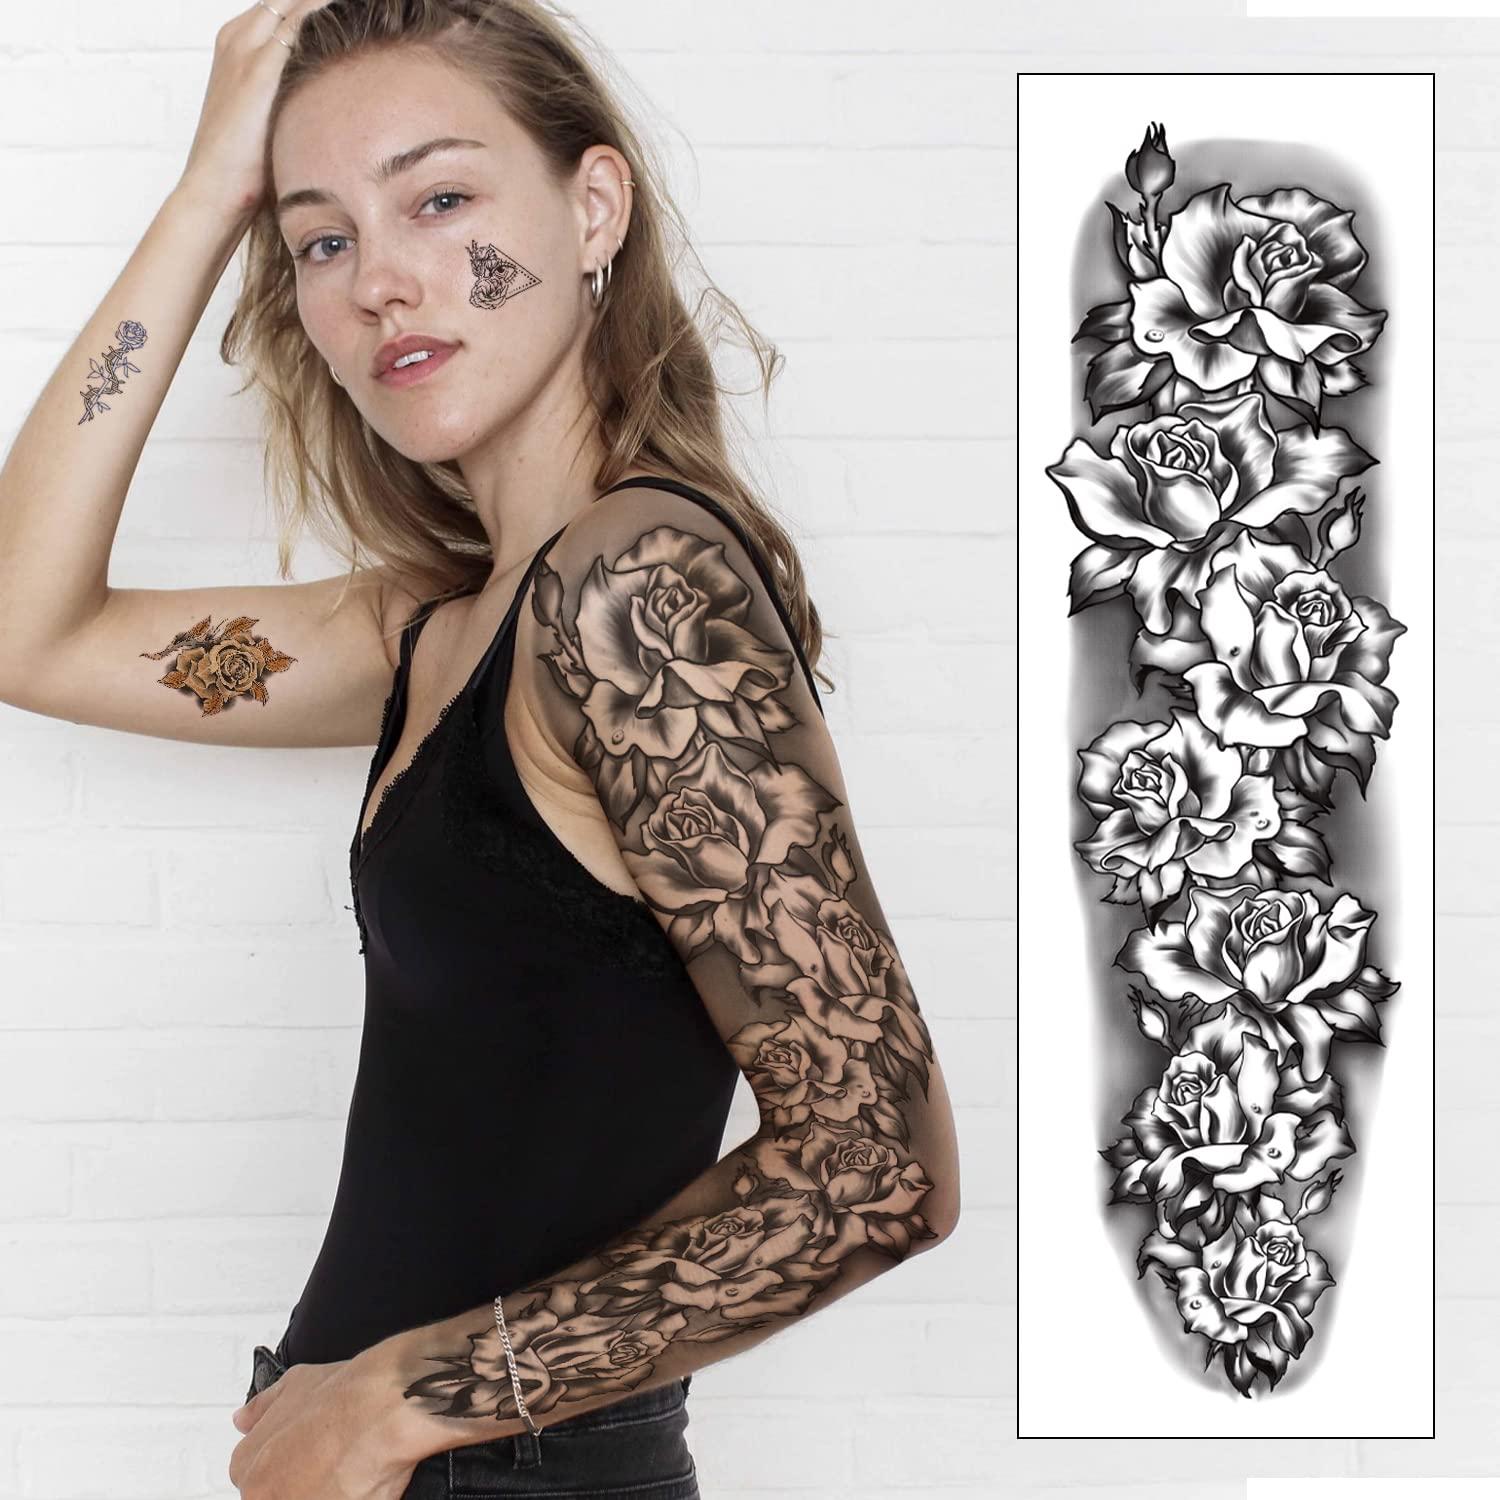 Soovsy 46 Sheets Full Arm Temporary Tattoos For Women Adults 3d Extra Large Realistic Tattoos